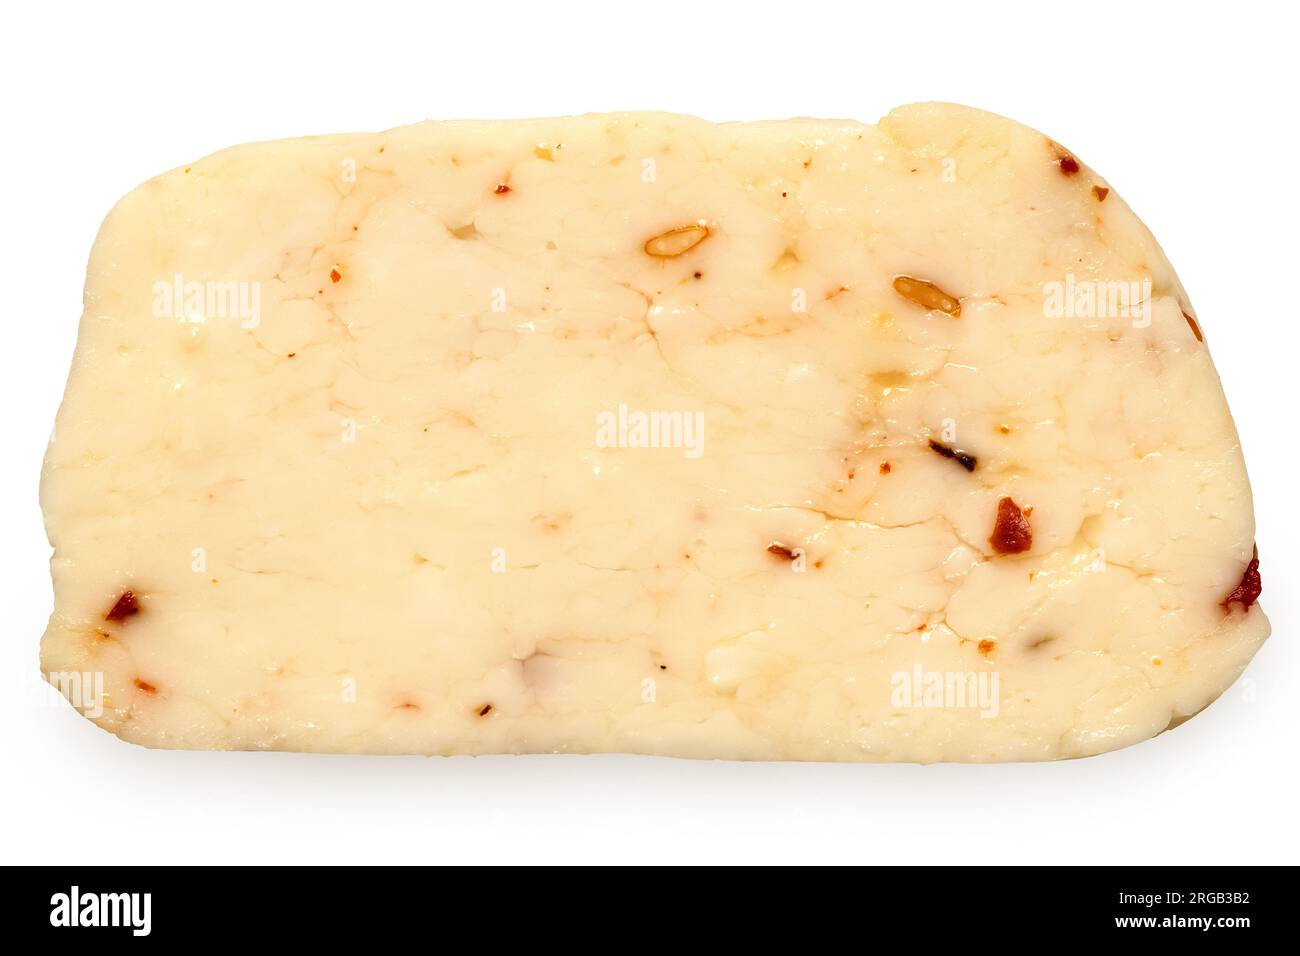 Slice of halloumi cheese with red chilli isolated on white. Top view. Stock Photo